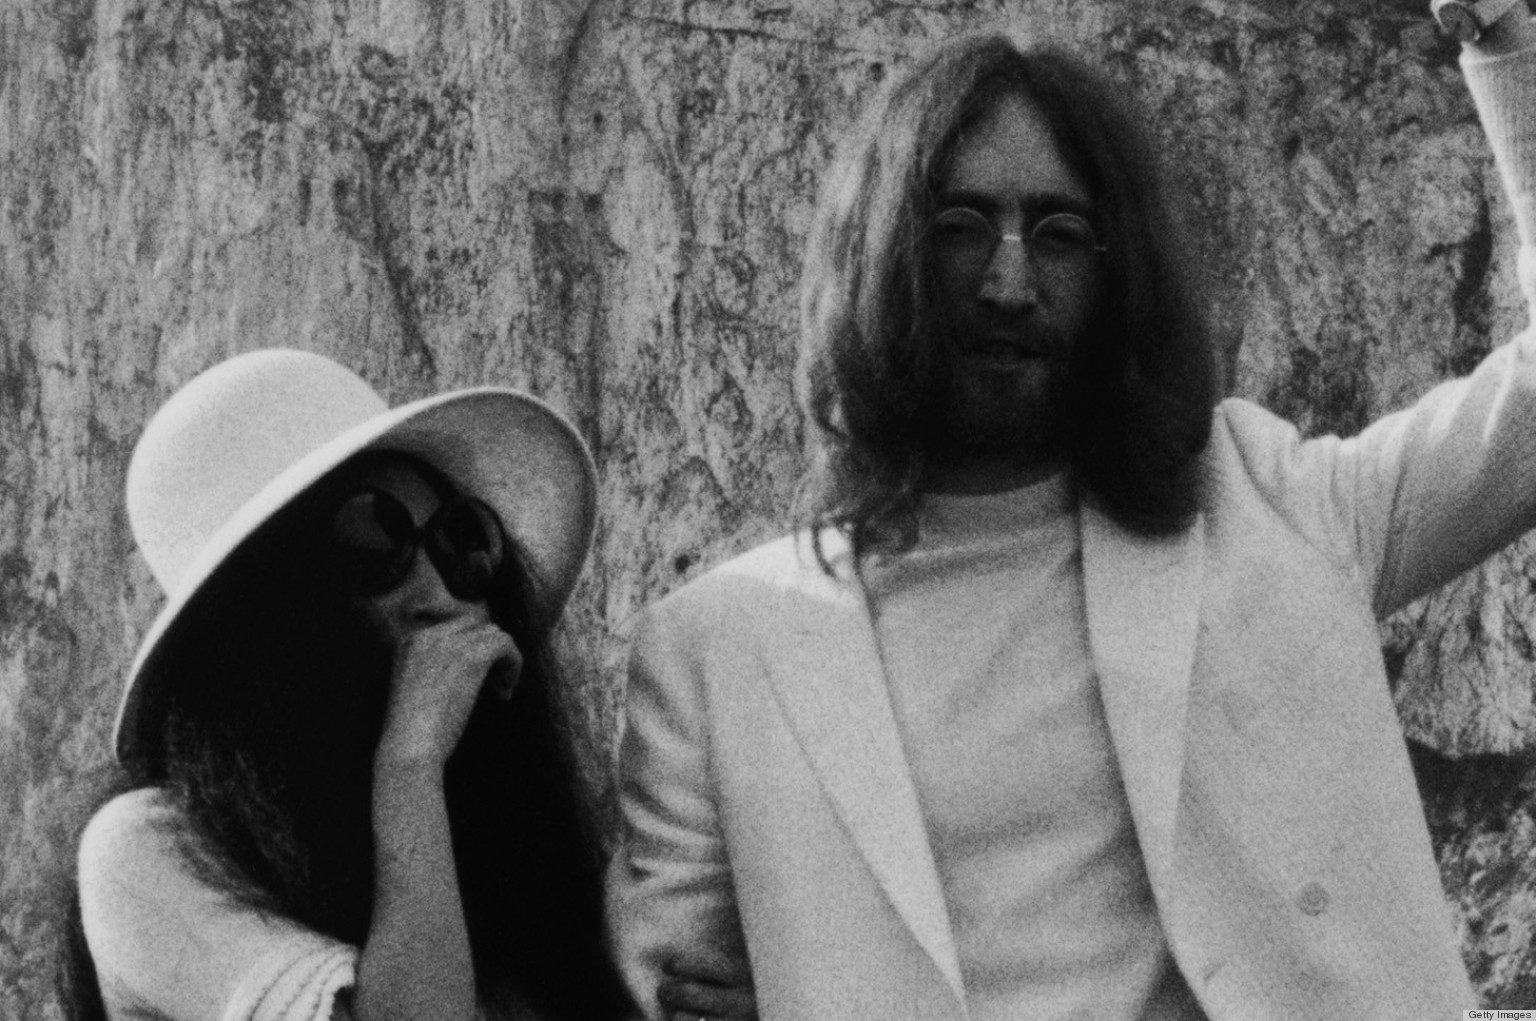 John Lennon And Yoko Ono Went For Unconventional Ensembles On Their ...